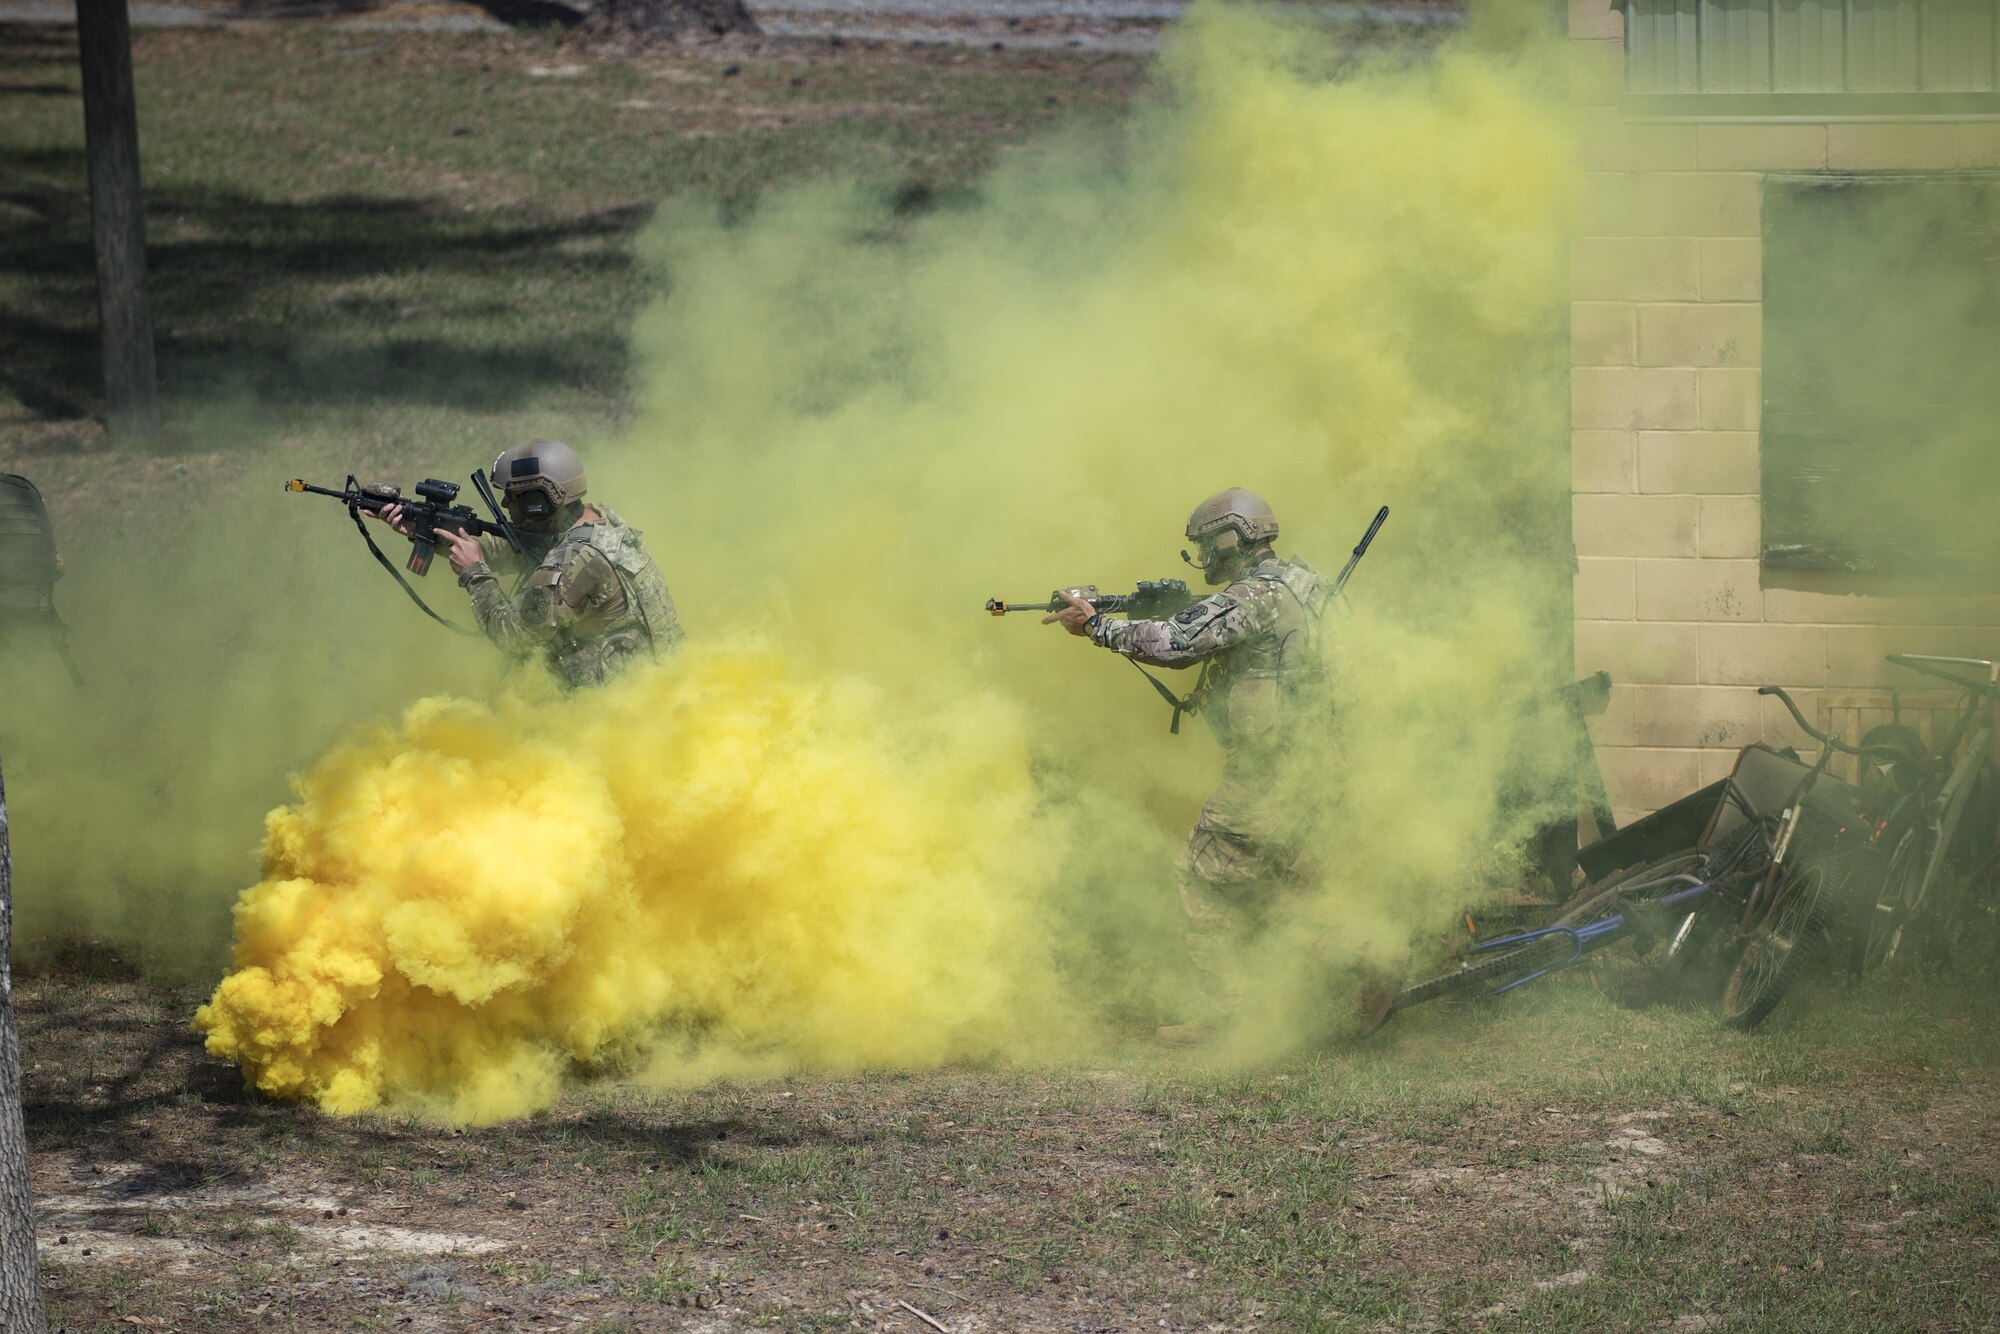 Airmen from the 822d Base Defense Squadron conduct a tactical demo during the 820th Base Defense Group’s 20th Anniversary Ceremony, March 28, 2017, at Moody Air Force Base, Ga. Retired chief of staff Gen. John Jumper and his wife, Ellen, and many former members of the 820th BDG visited to celebrate the anniversary. (U.S. Air Force photo by Airman 1st Class Daniel Snider)